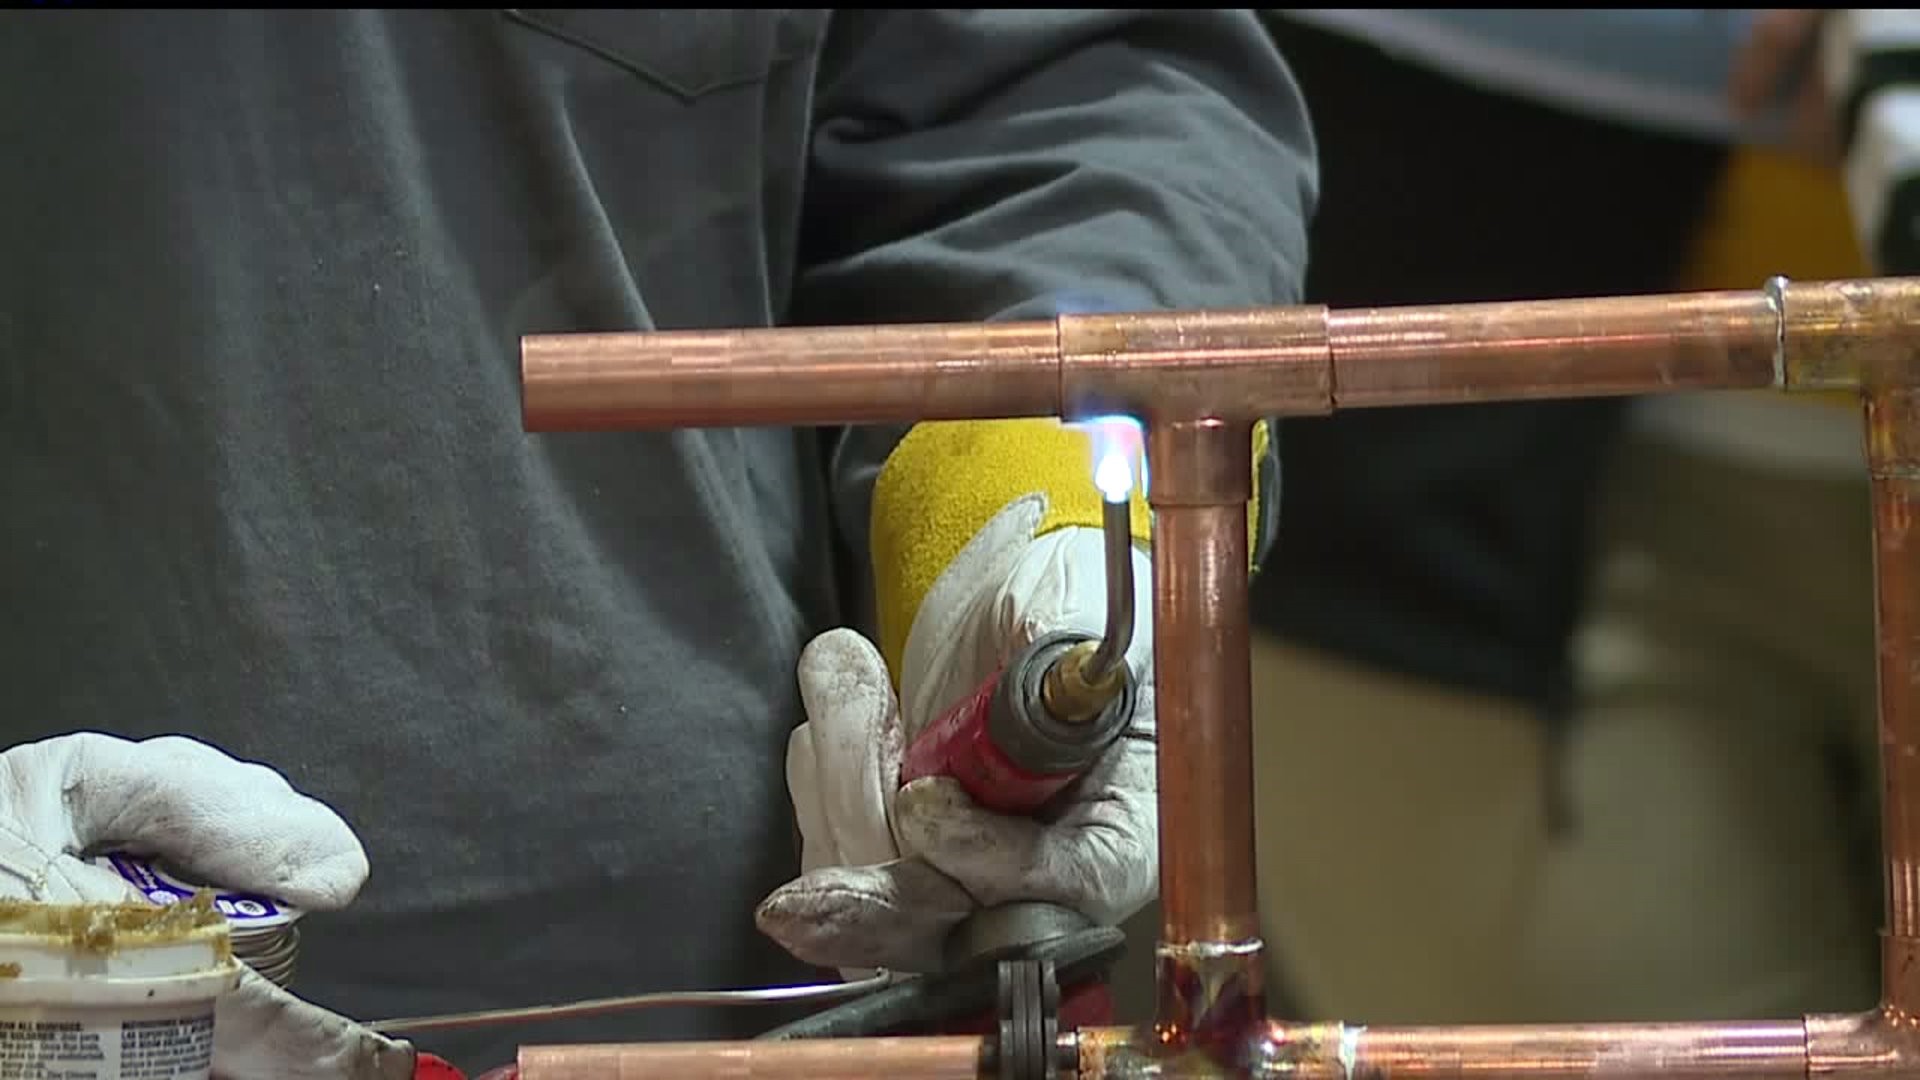 High school students get hands on experience learning about skilled trades